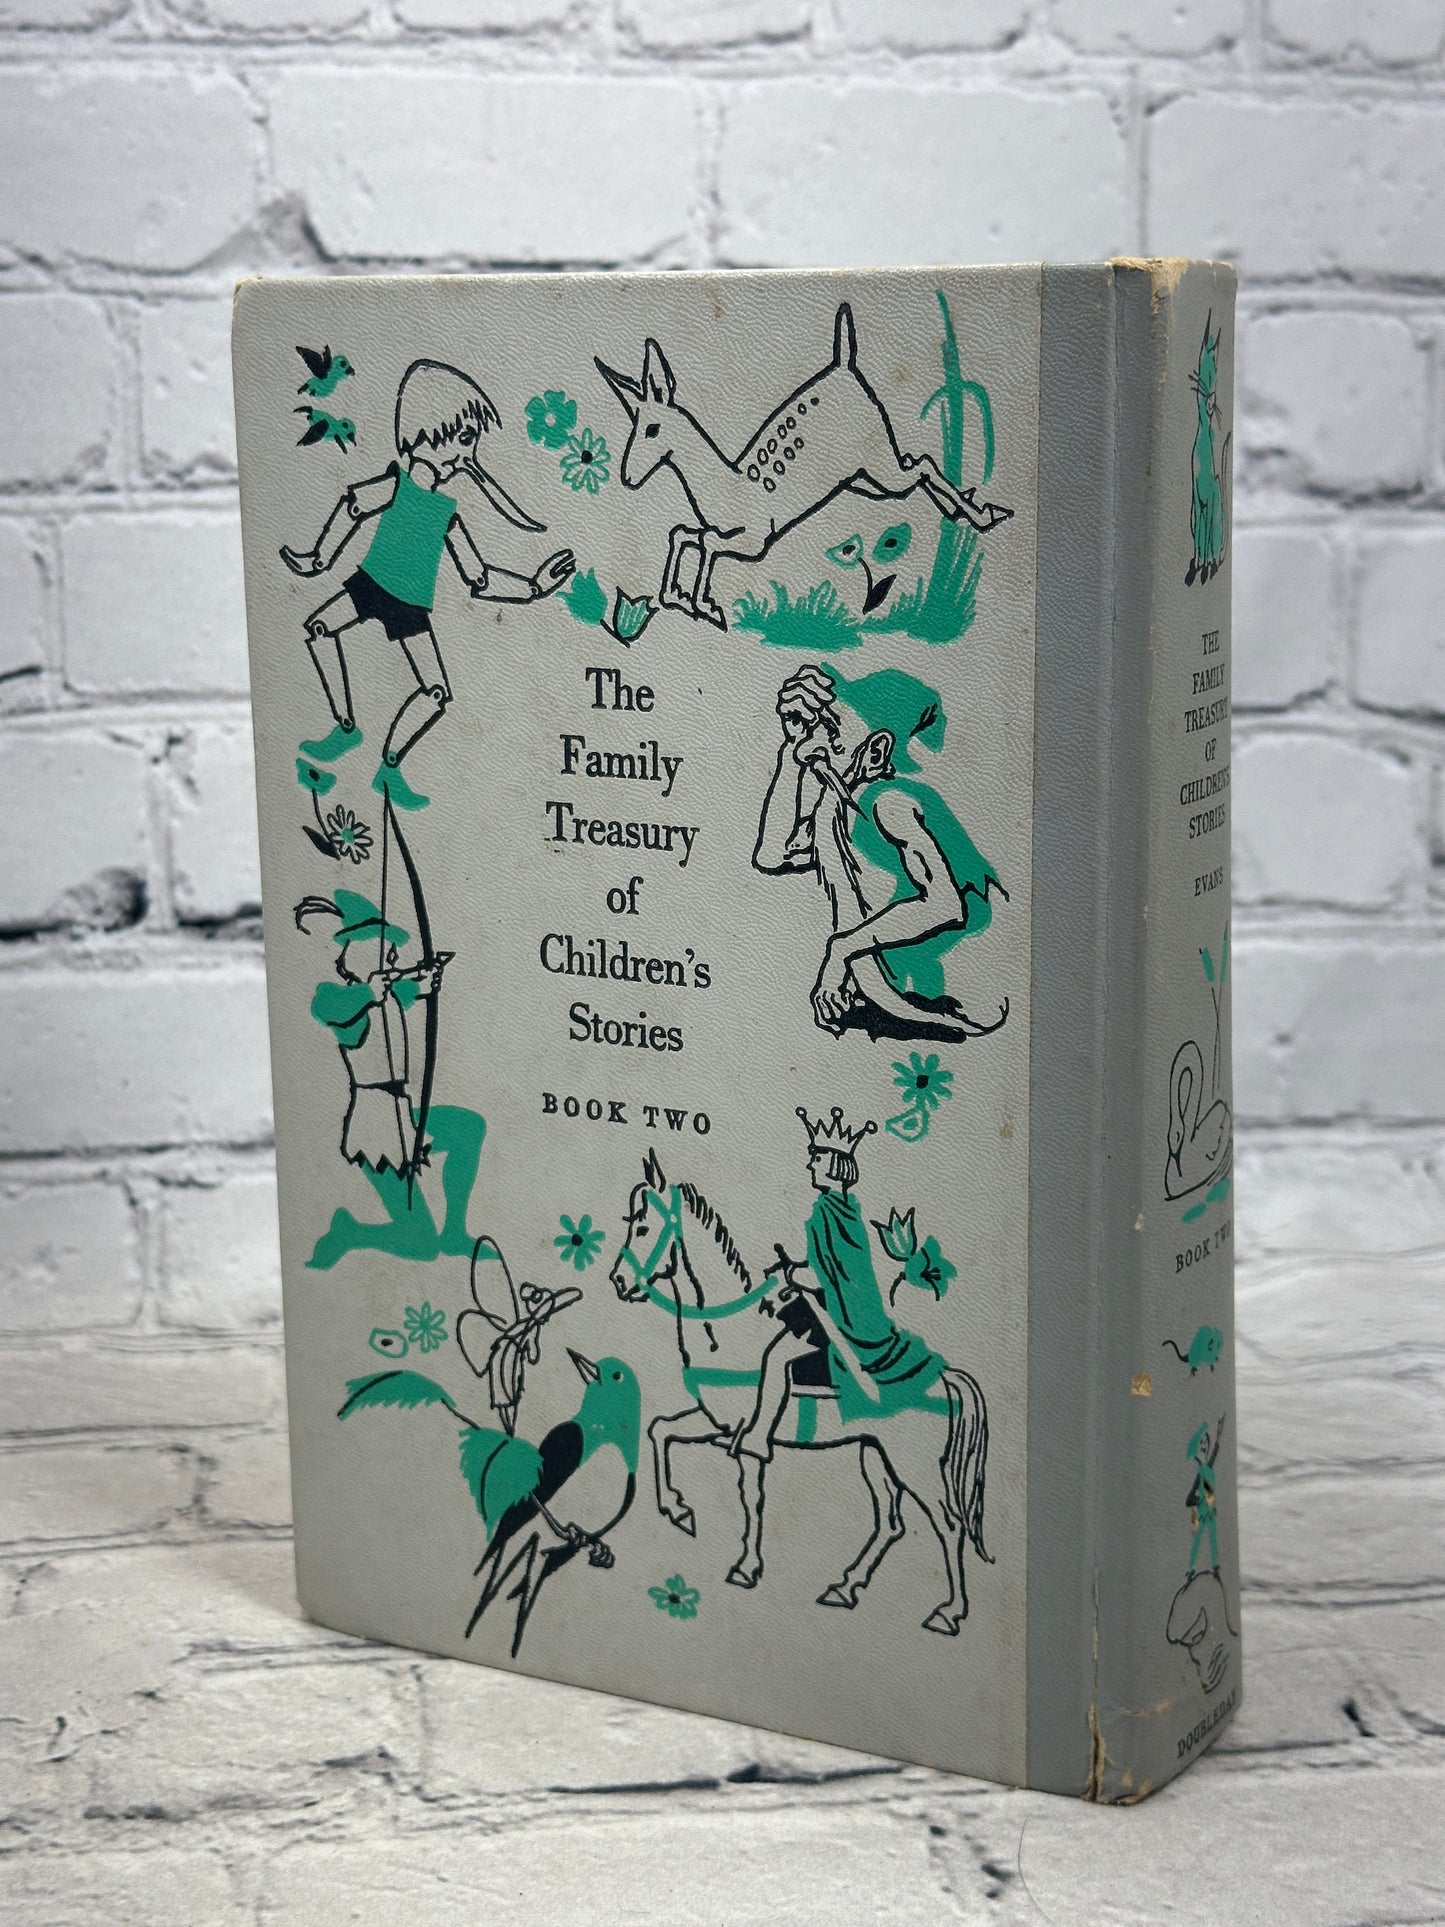 The Family Treasury of Children's Stories by Pauline Evans: Book Two [1956]